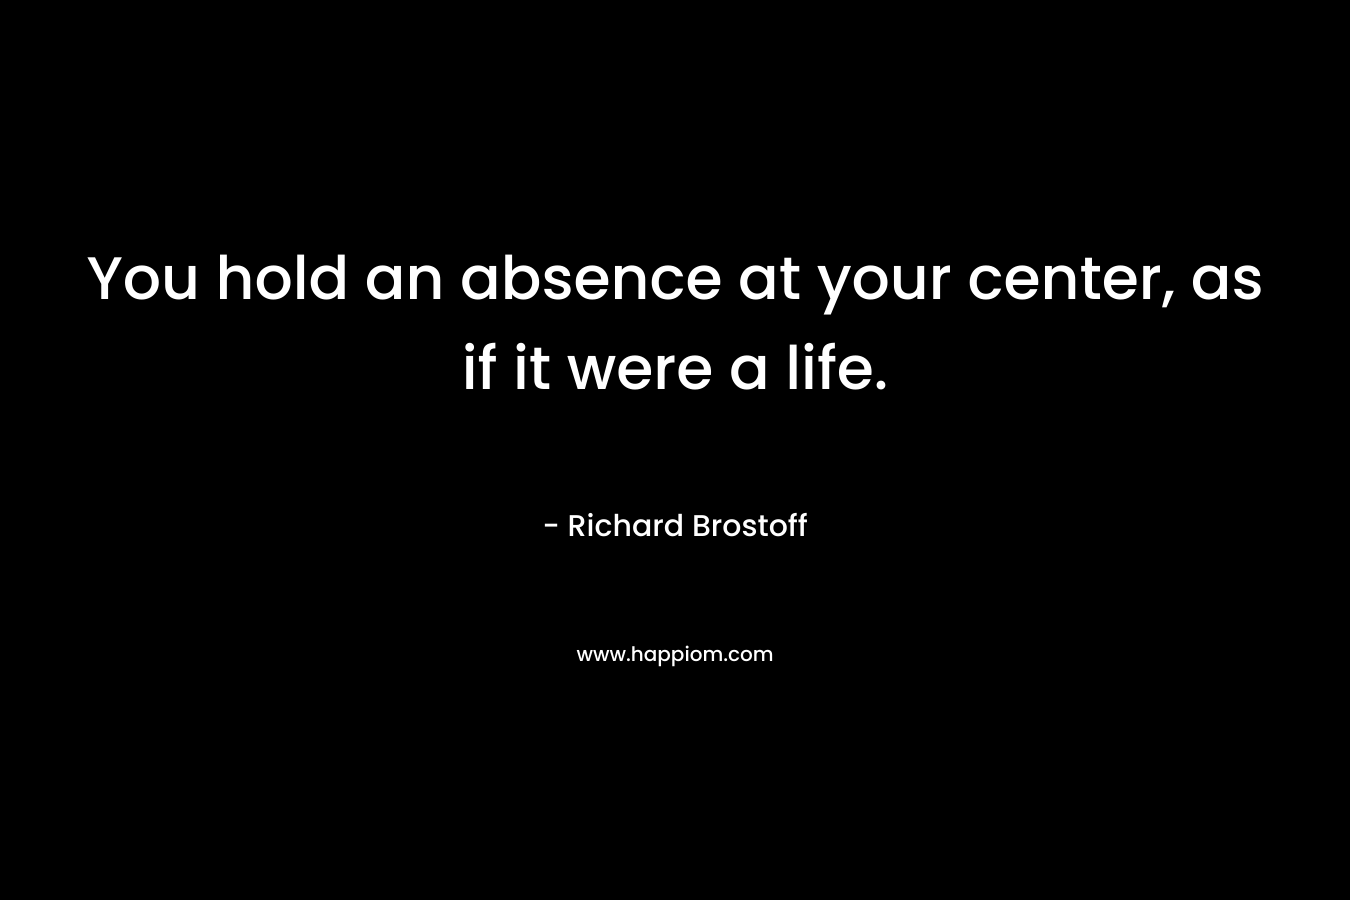 You hold an absence at your center, as if it were a life. – Richard Brostoff